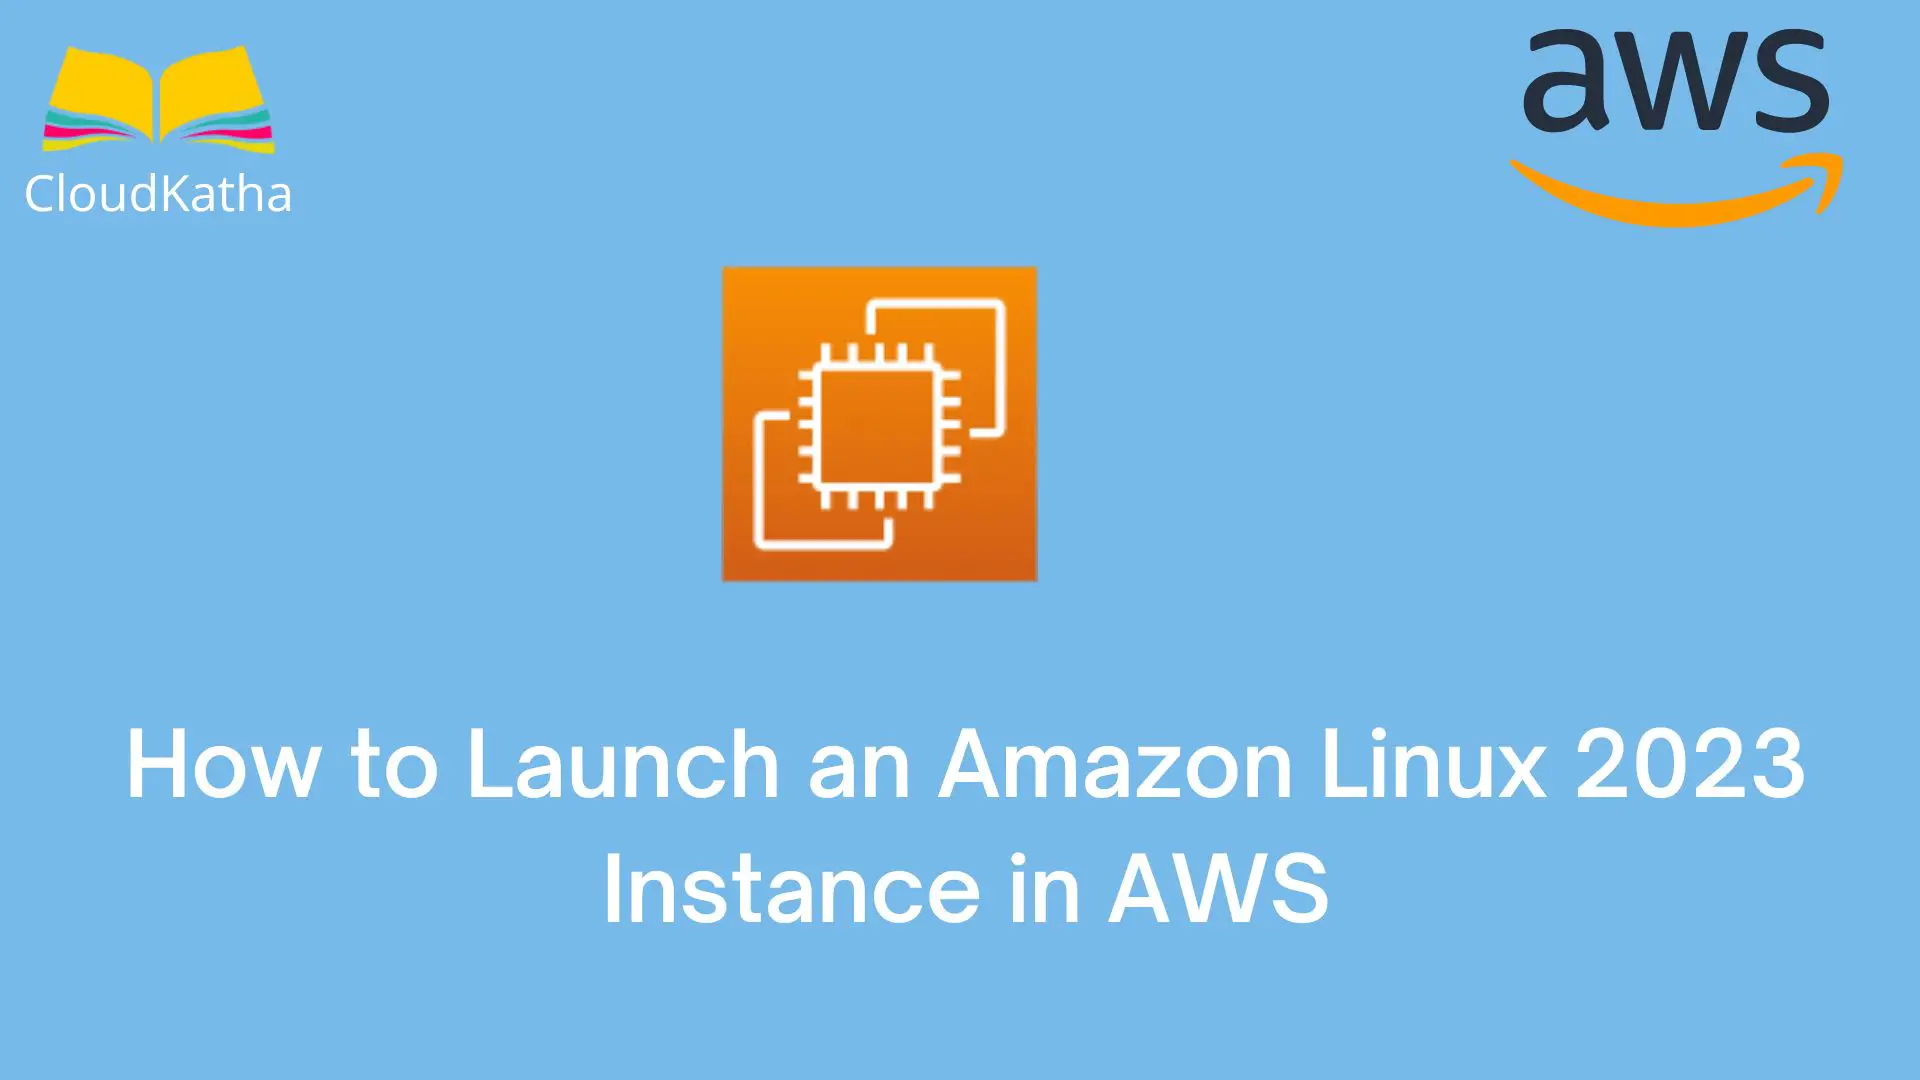 How to Launch an Amazon Linux 2023 Instance in AWS